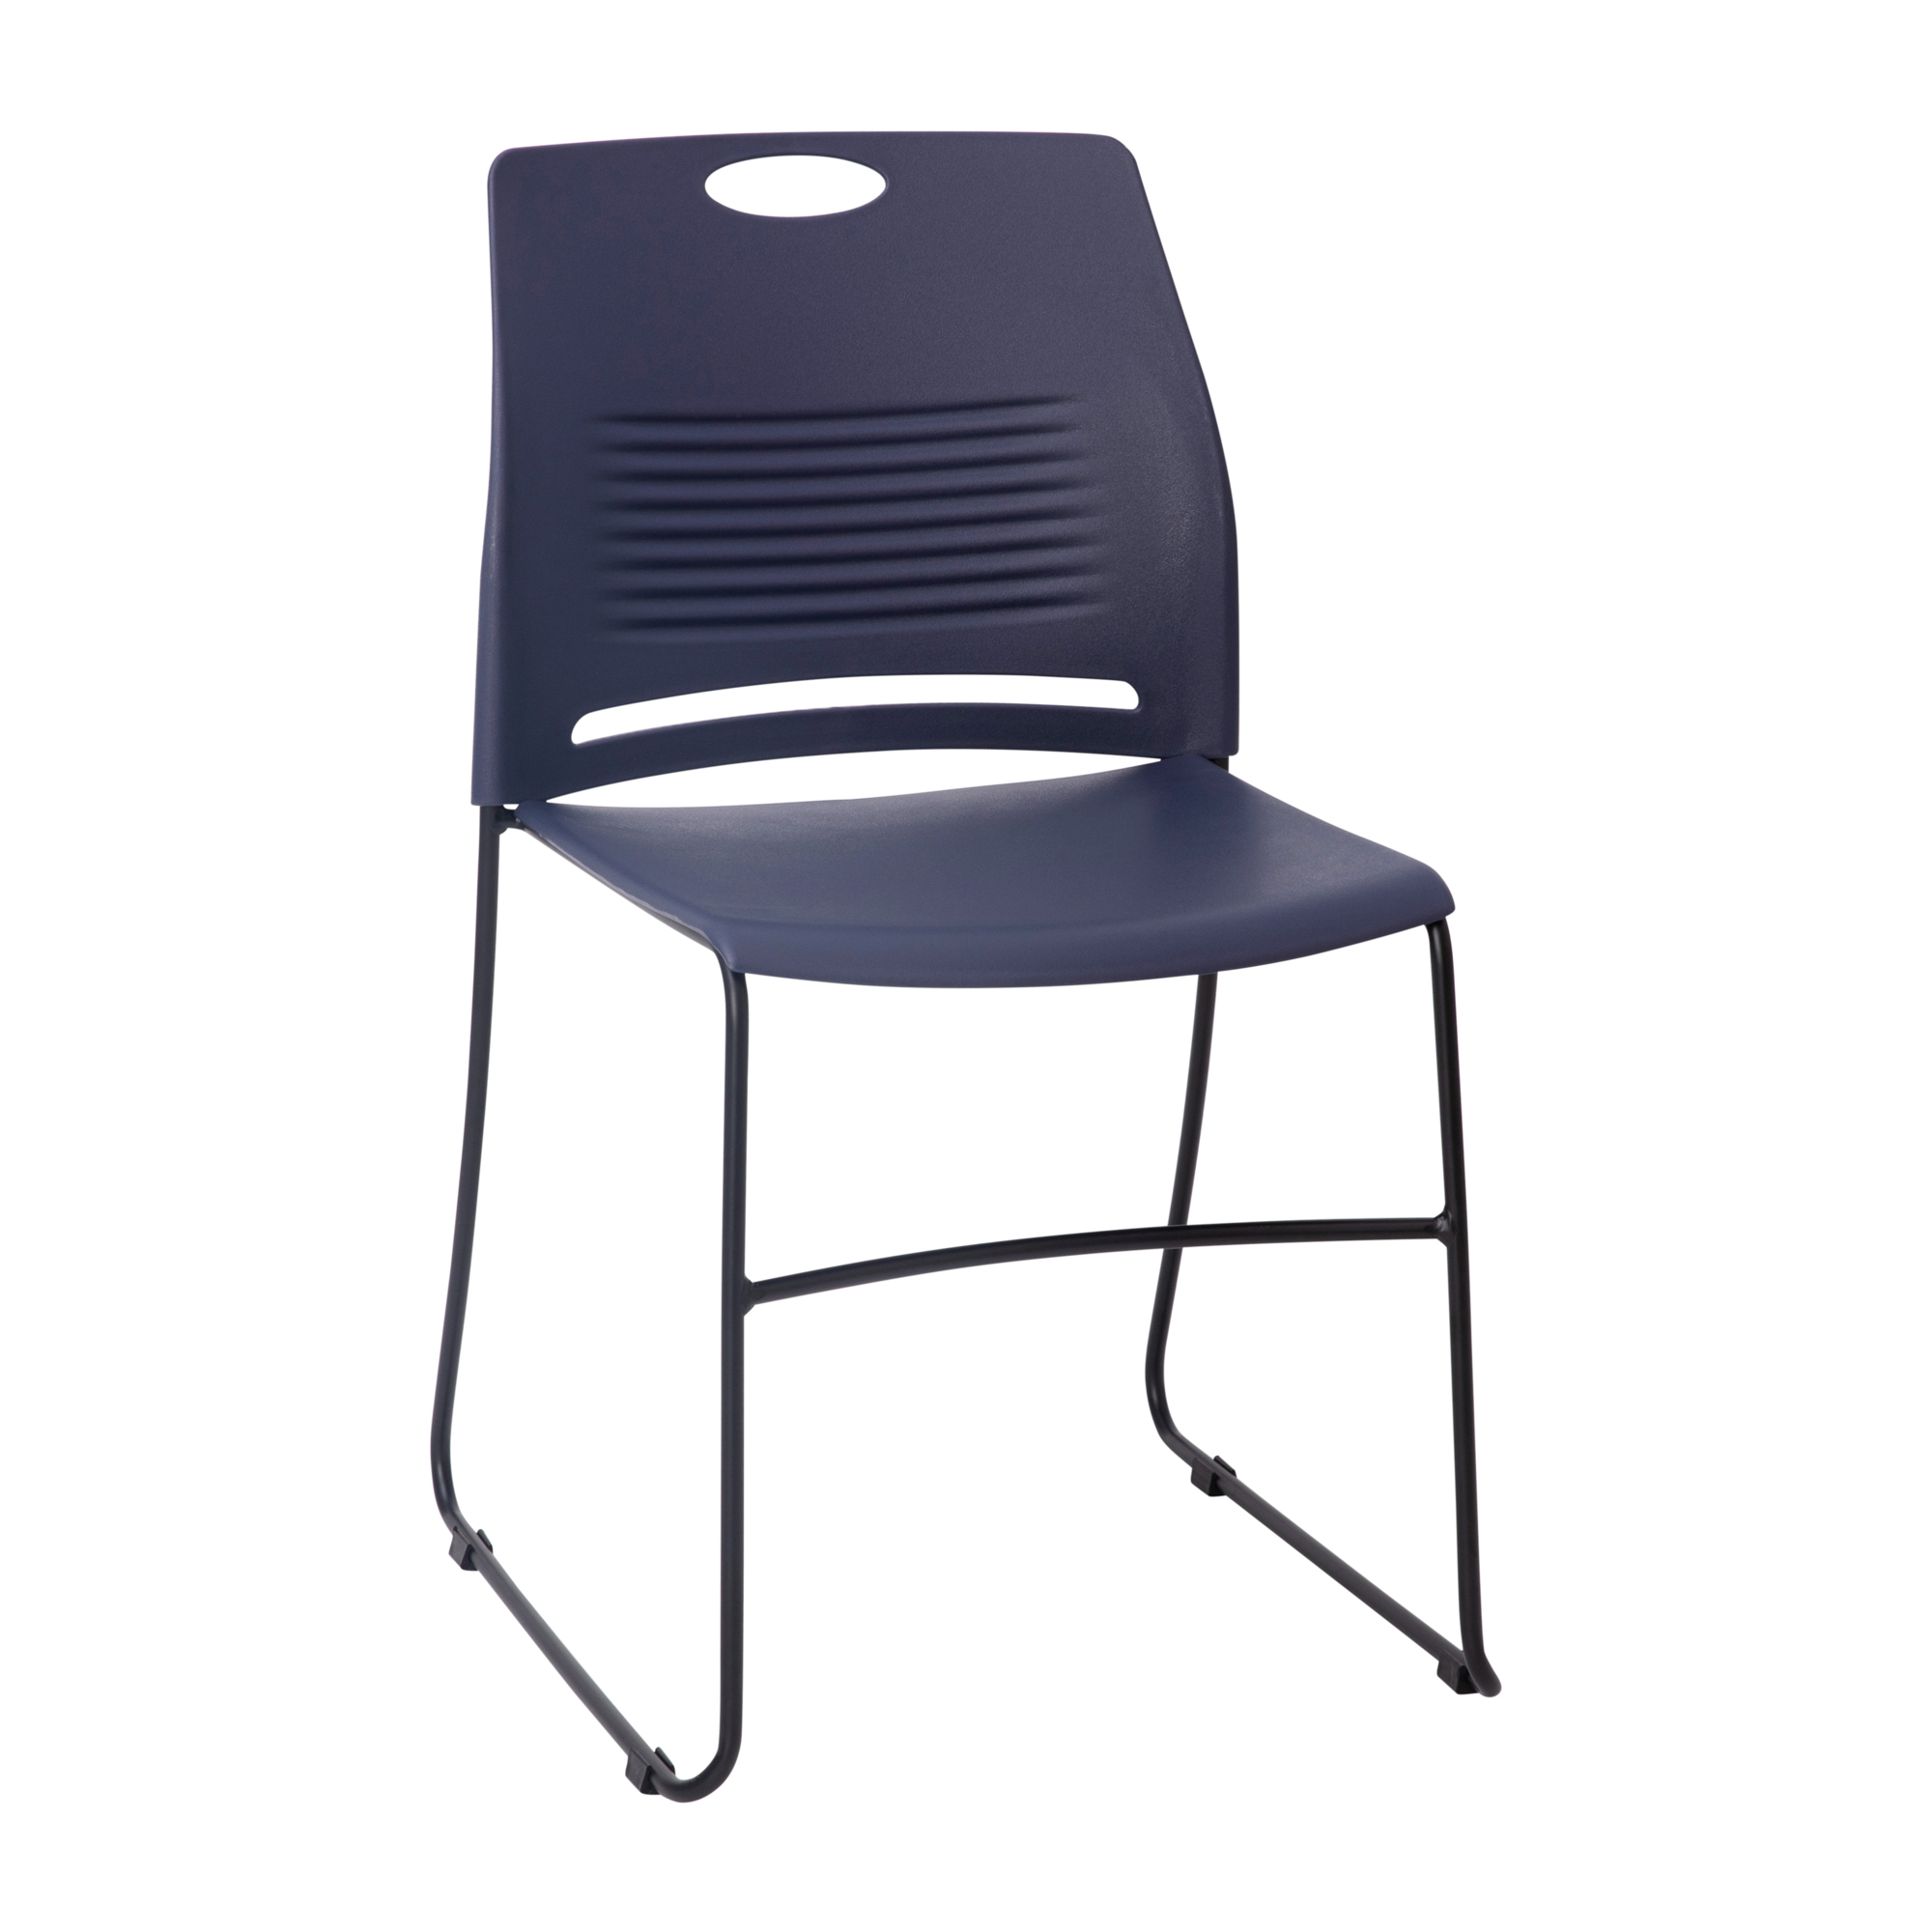 Flash Furniture, Navy Plastic Stack Chair with Steel Sled Base, Primary Color Blue, Included (qty.) 1, Model RUTNC499ANV